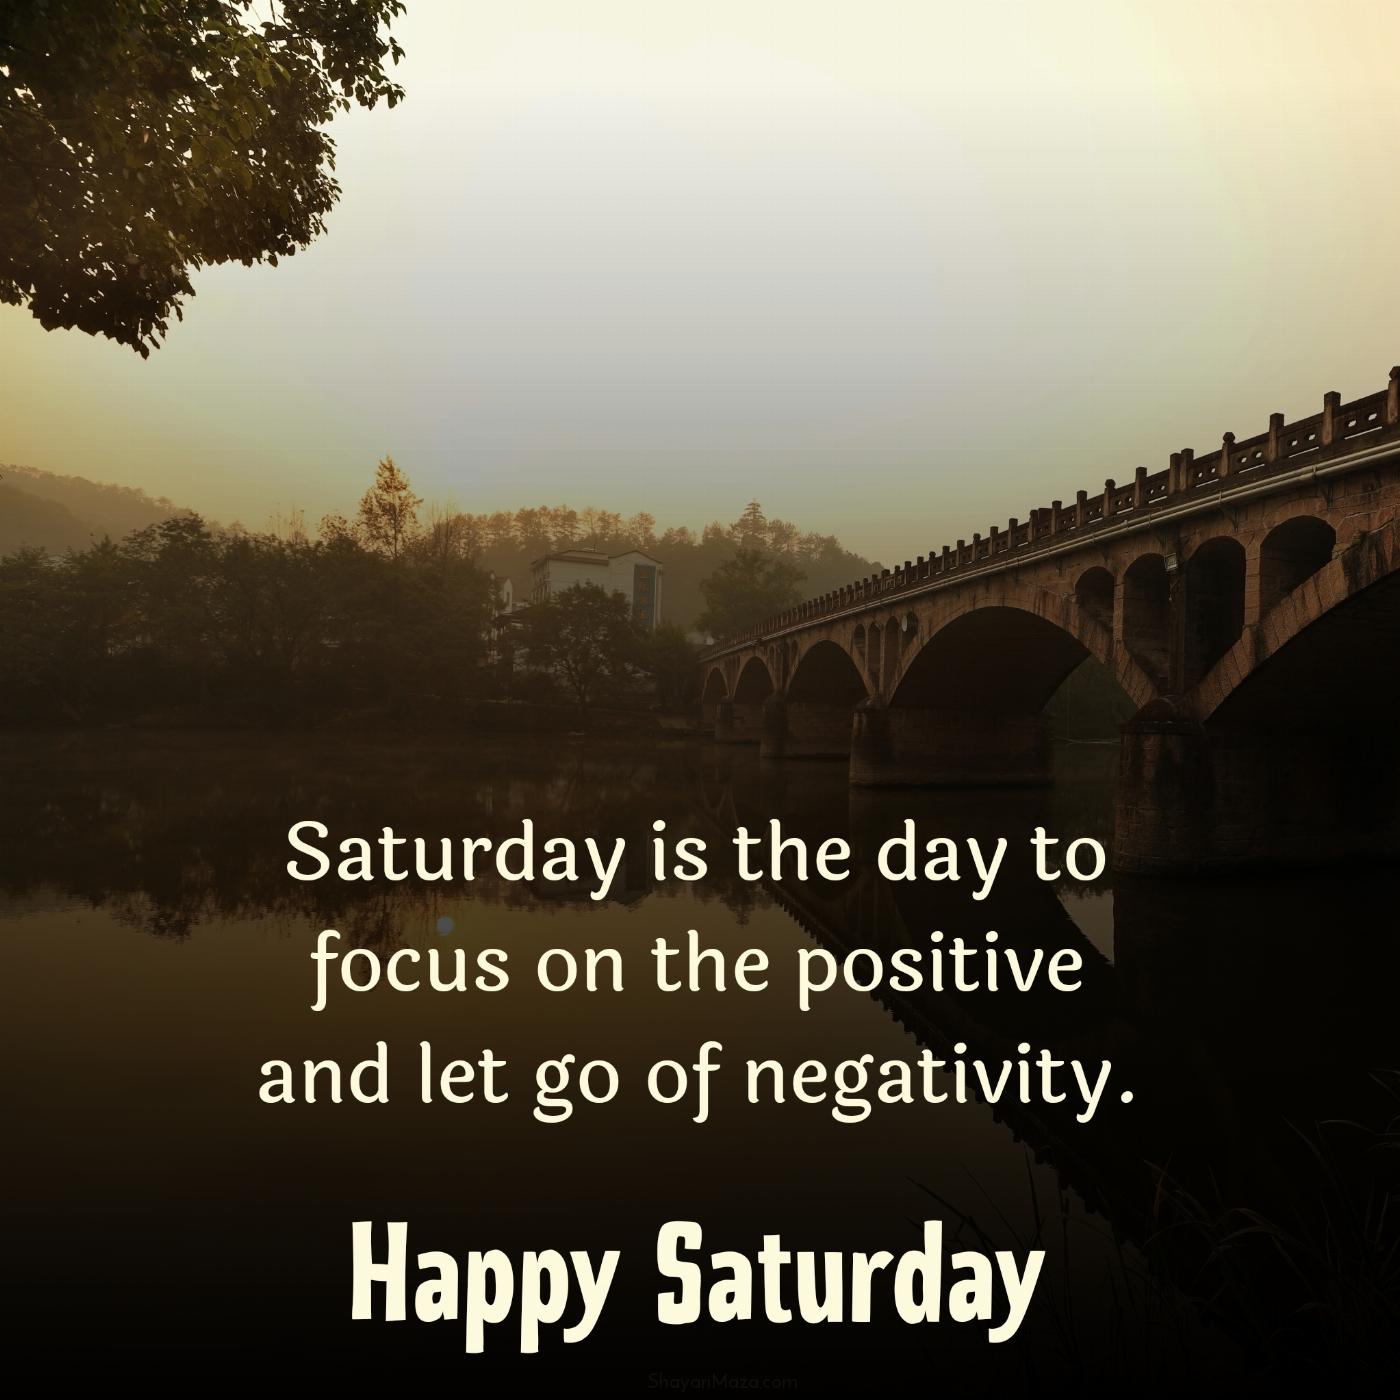 Saturday is the day to focus on the positive and let go of negativity